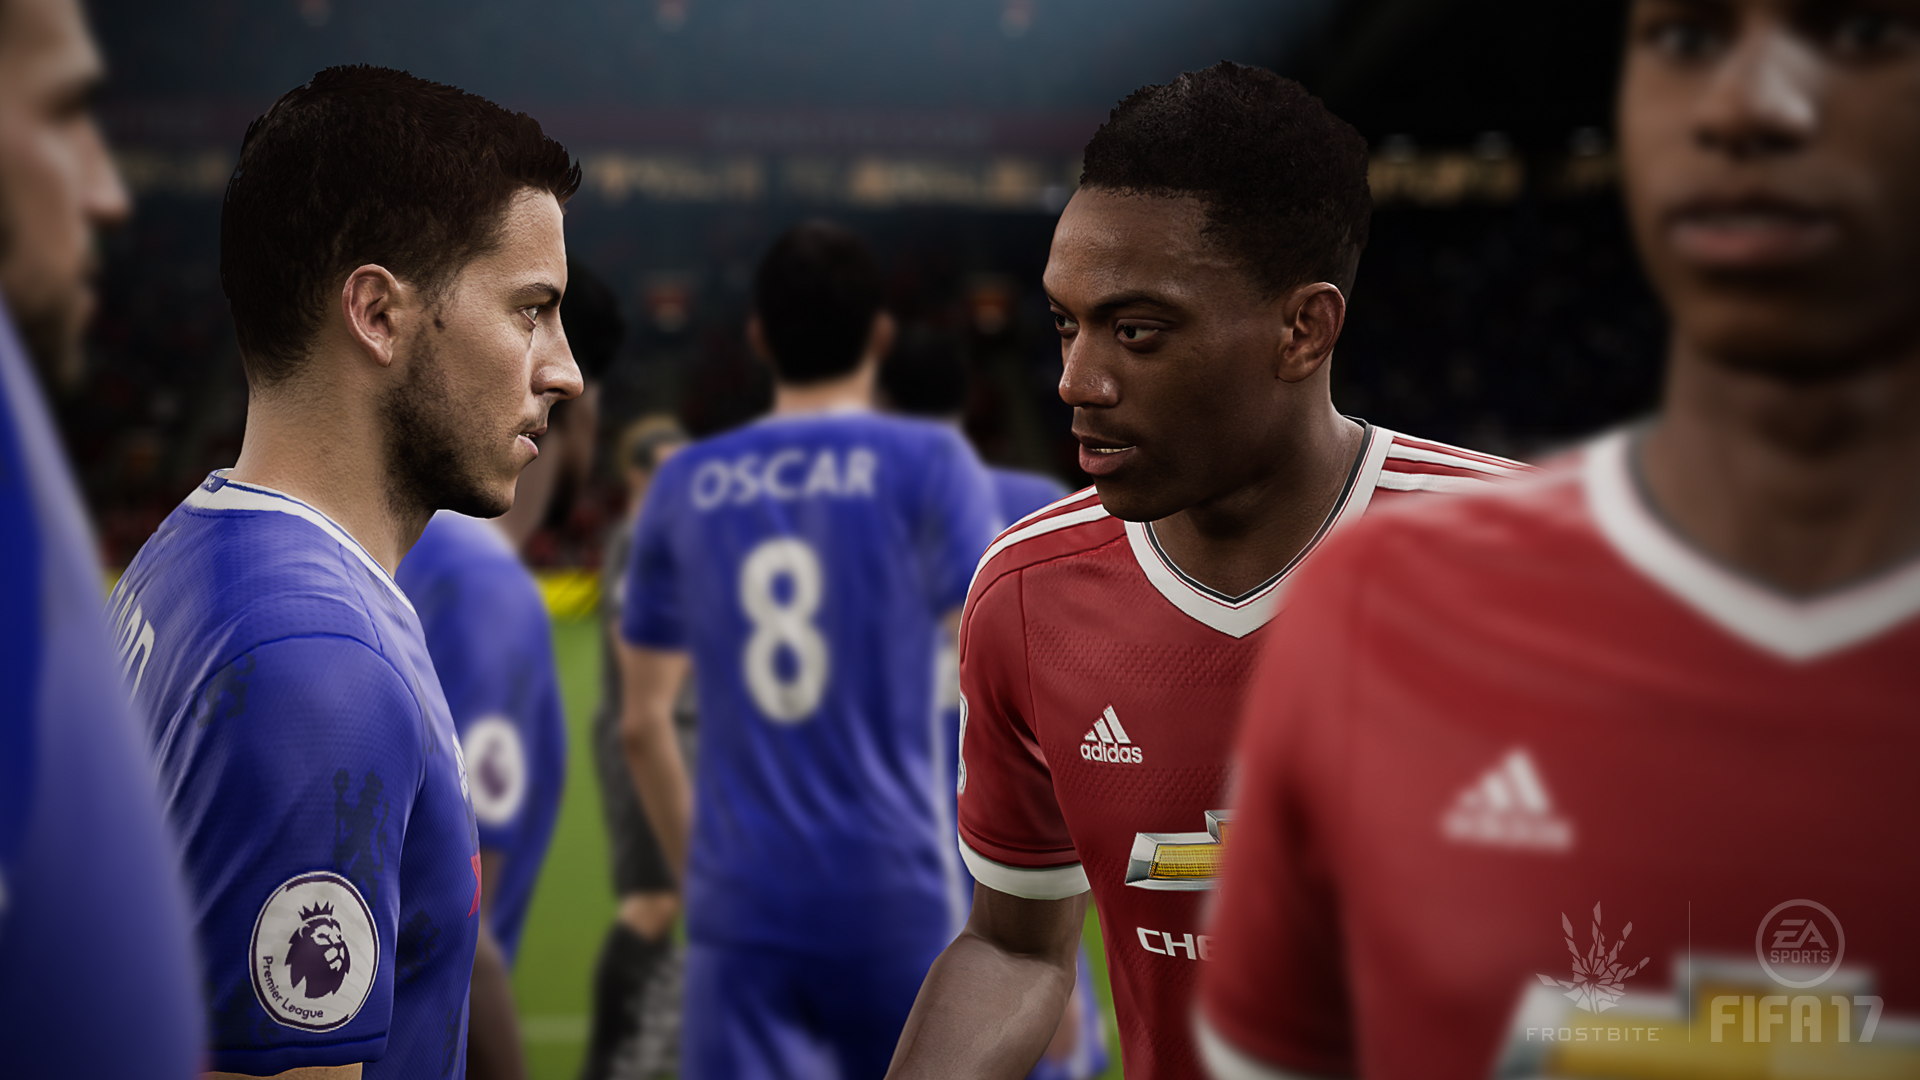 Fifa 17 S The Journey Brings Story Cut Scenes To Single Player Career Ars Technica